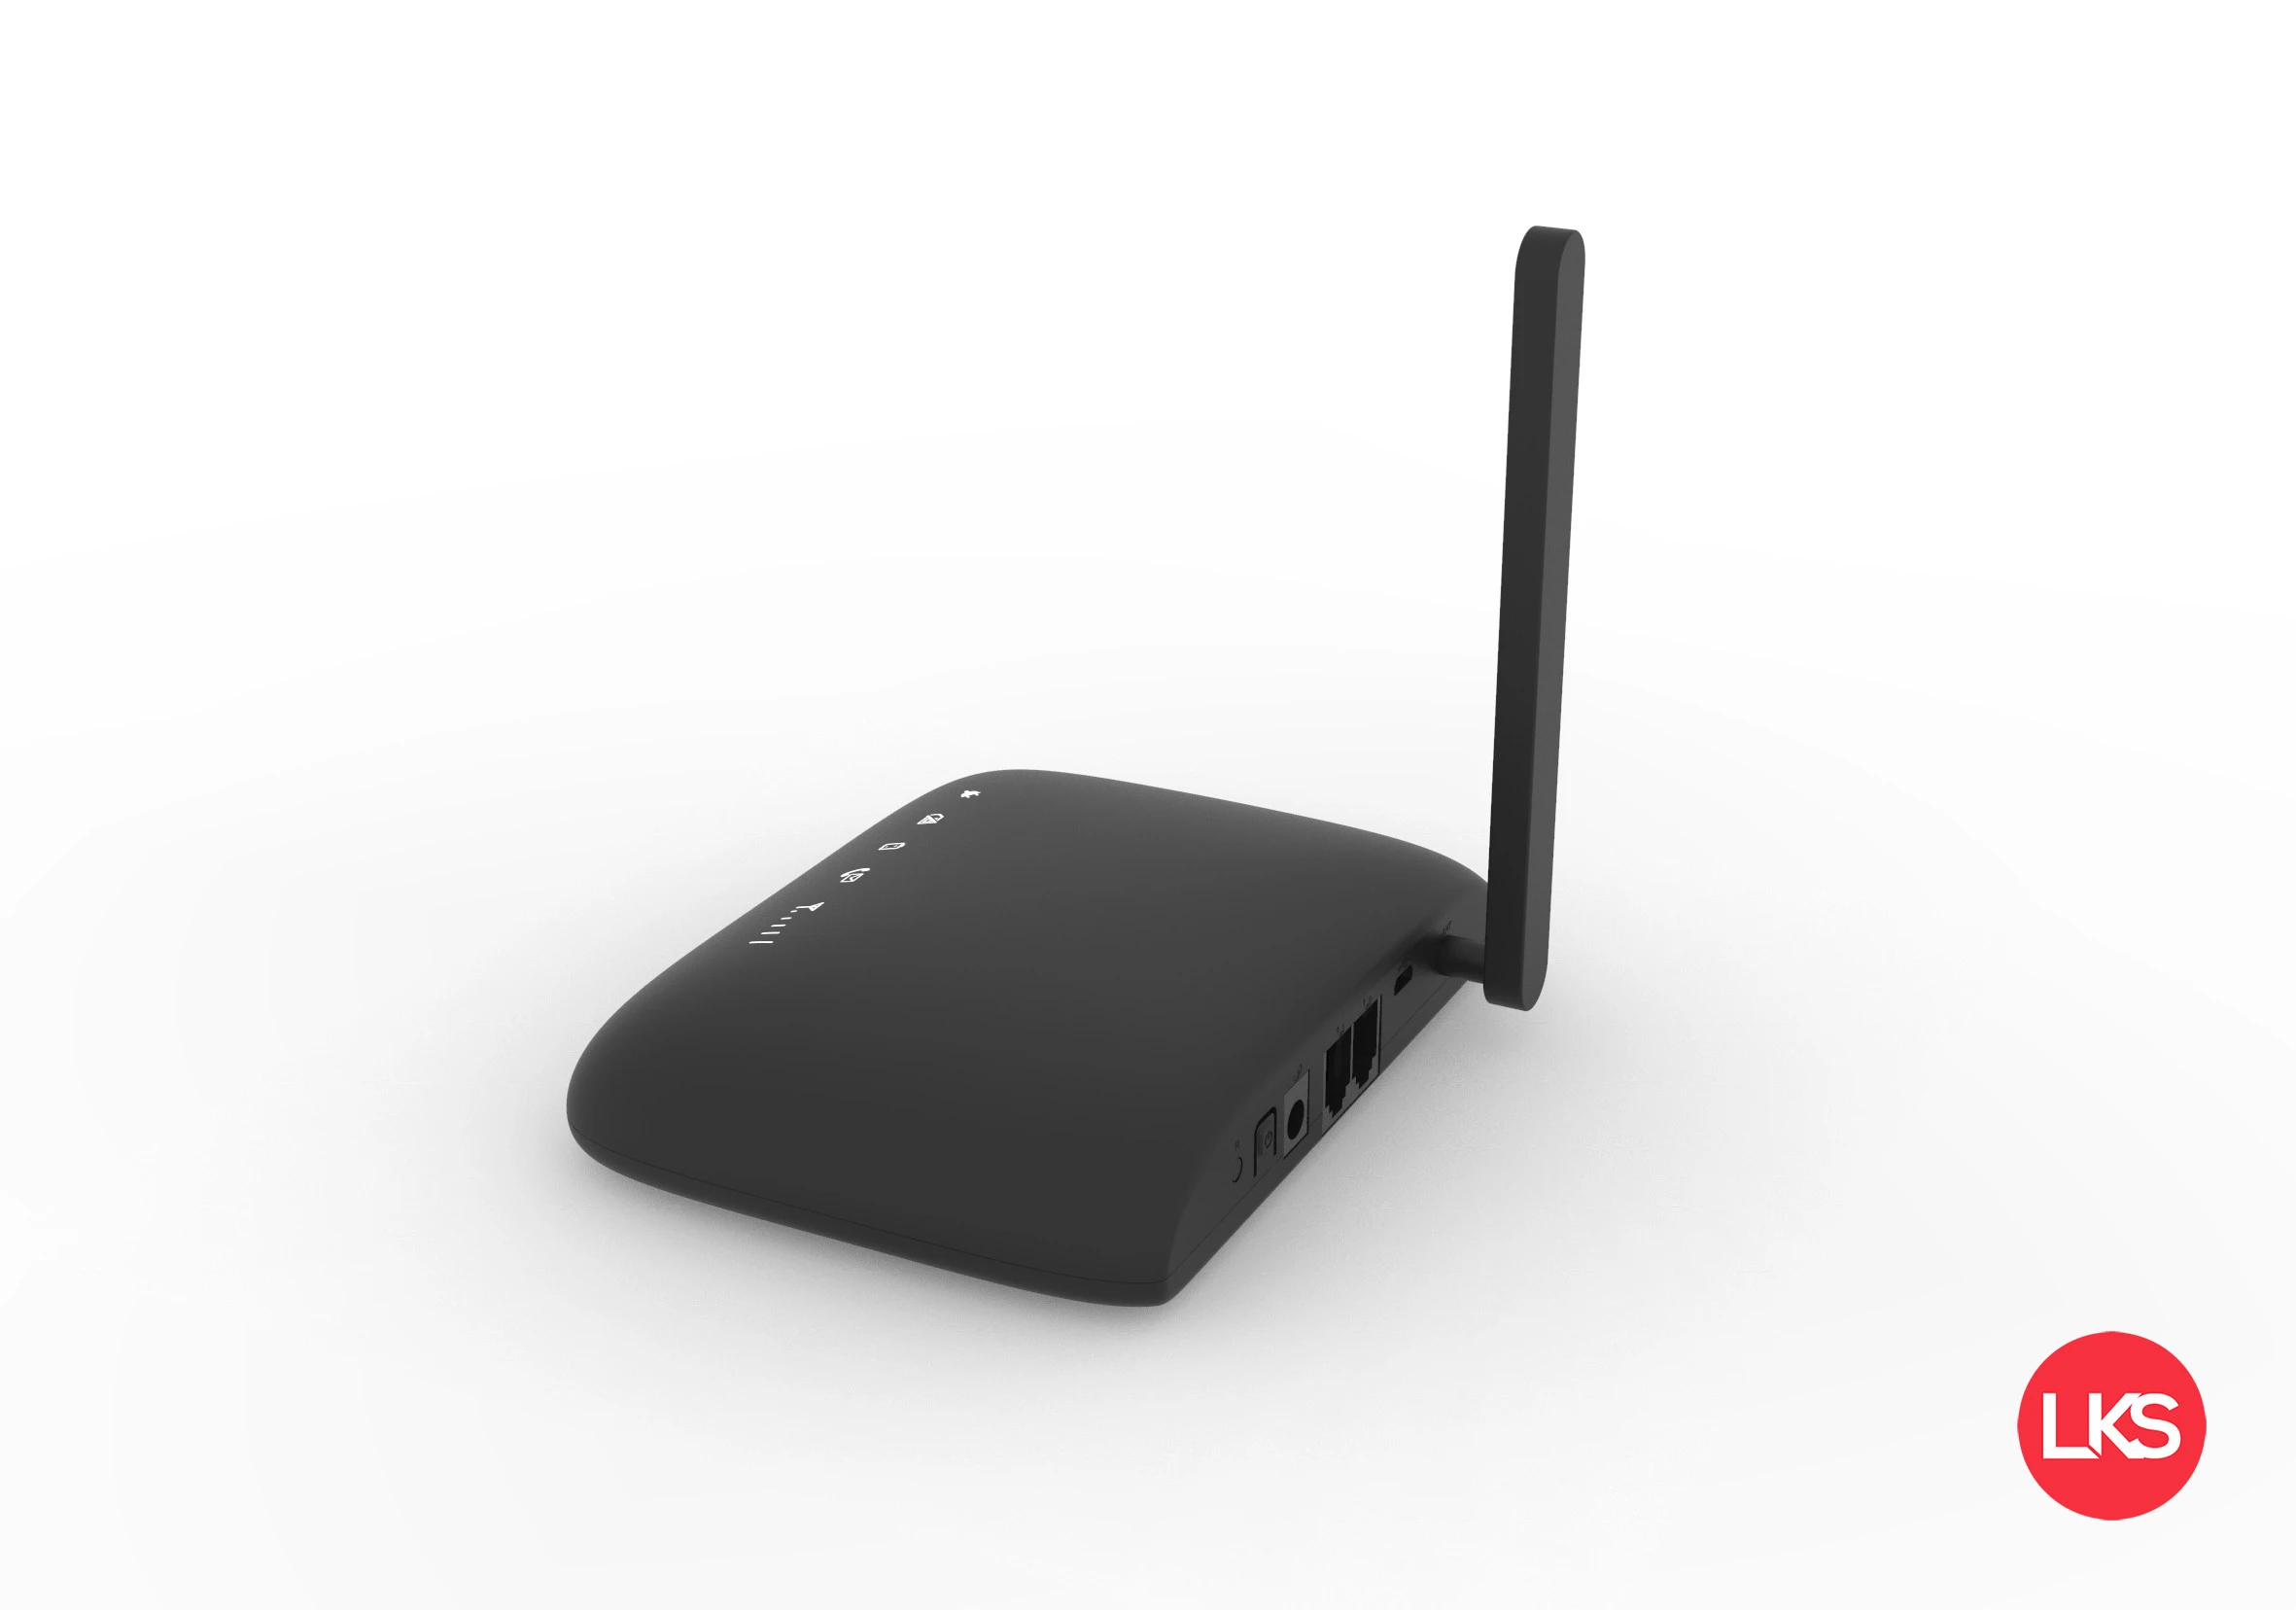 VOBO 3 FIXED WIRELESS TERMINAL VOICE BOX 3G DUAL BAND UMTS WCDMA GSM